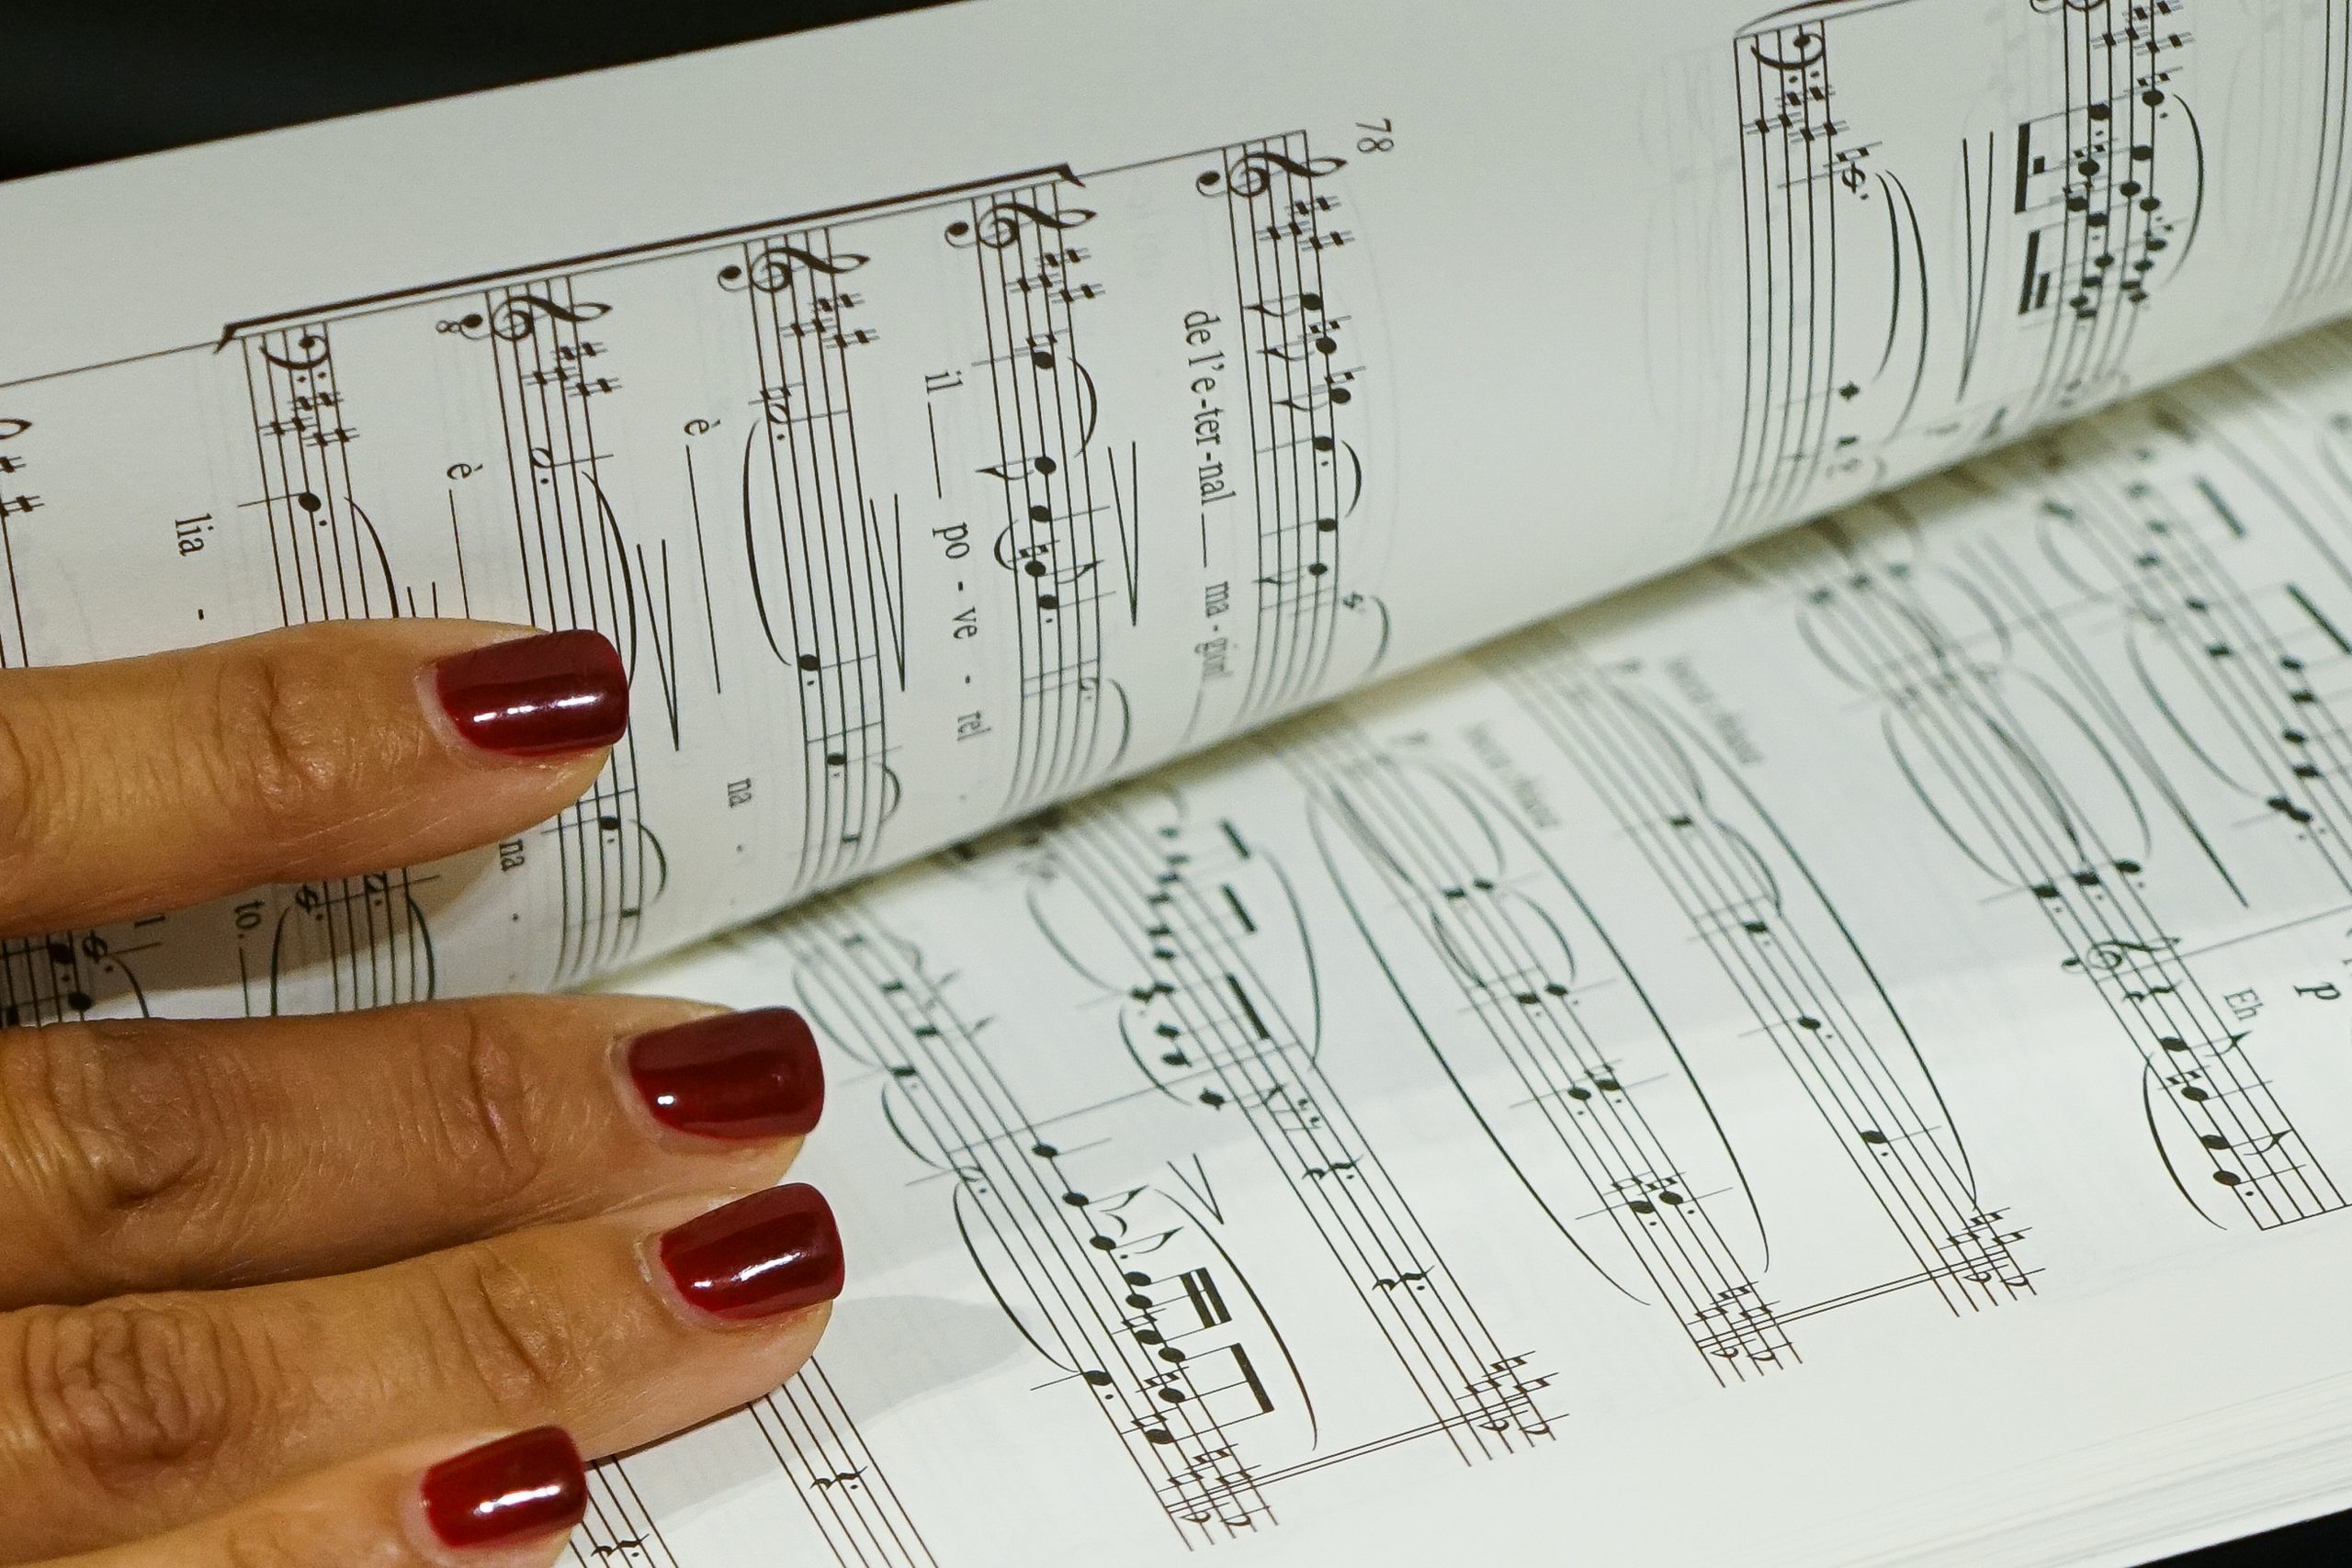 Photography. Detail of musical score. On top is a hand, with nails painted dark red.